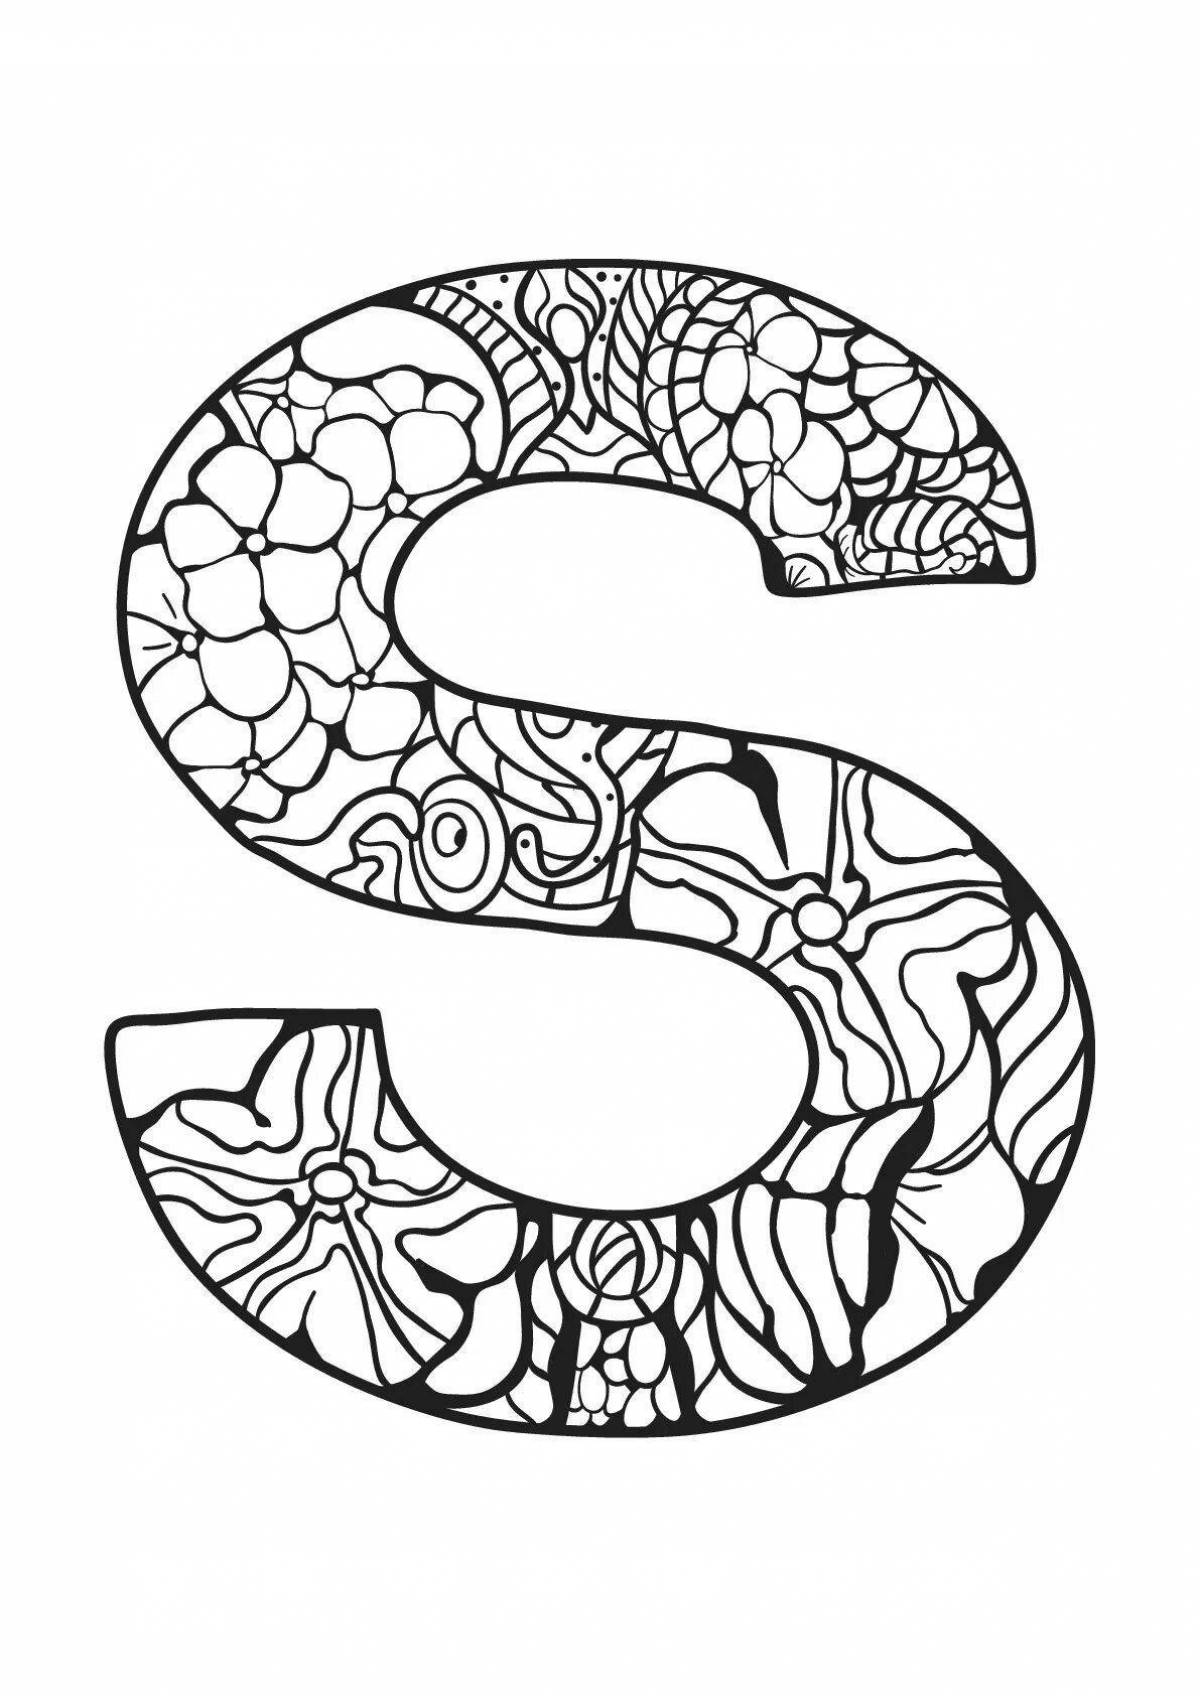 Coloring letter s